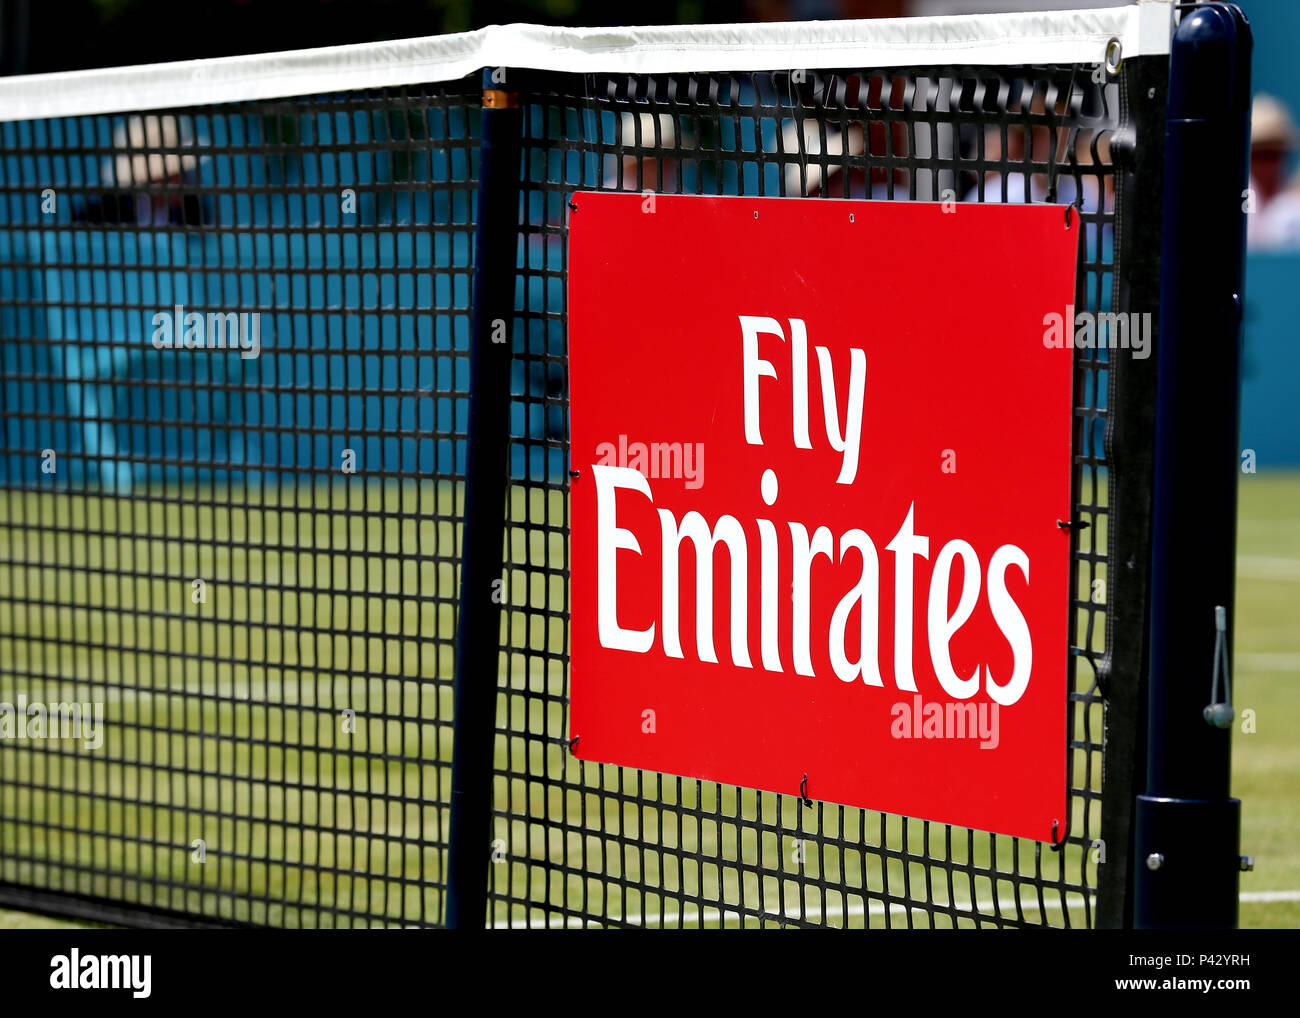 Queens Club, London, UK. 20th June, 2018. The Fever Tree Tennis  Championships; Fly Emirates sponsor on